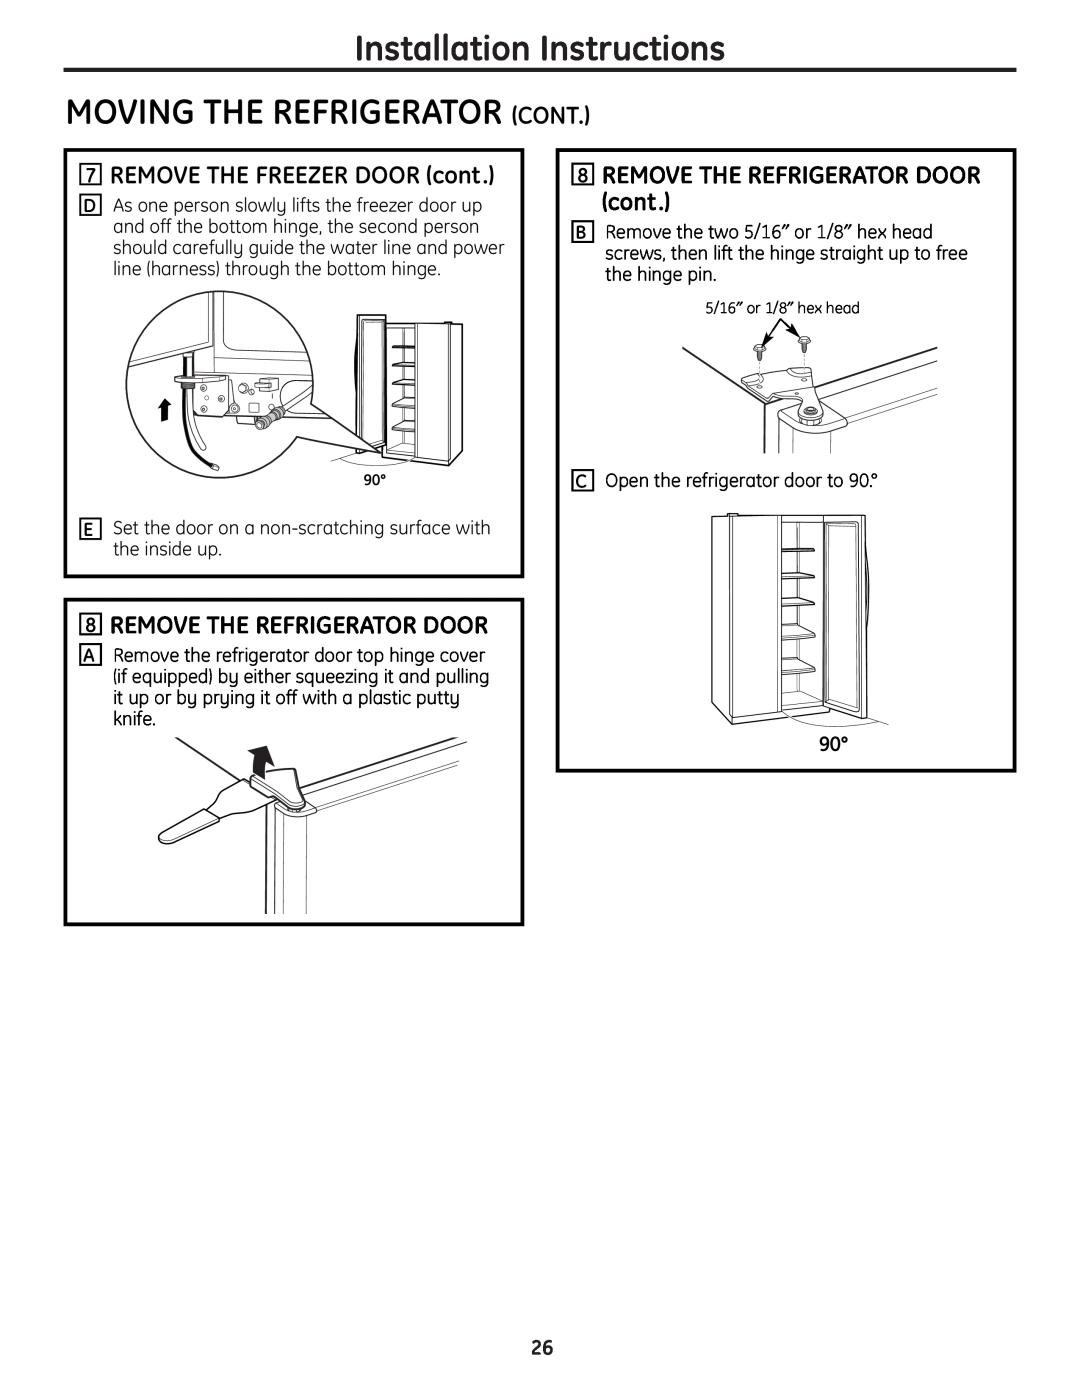 GE 23 Installation Instructions MOVING THE REFRIGERATOR CONT, REMOVE THE FREEZER DOOR cont, Remove The Refrigerator Door 